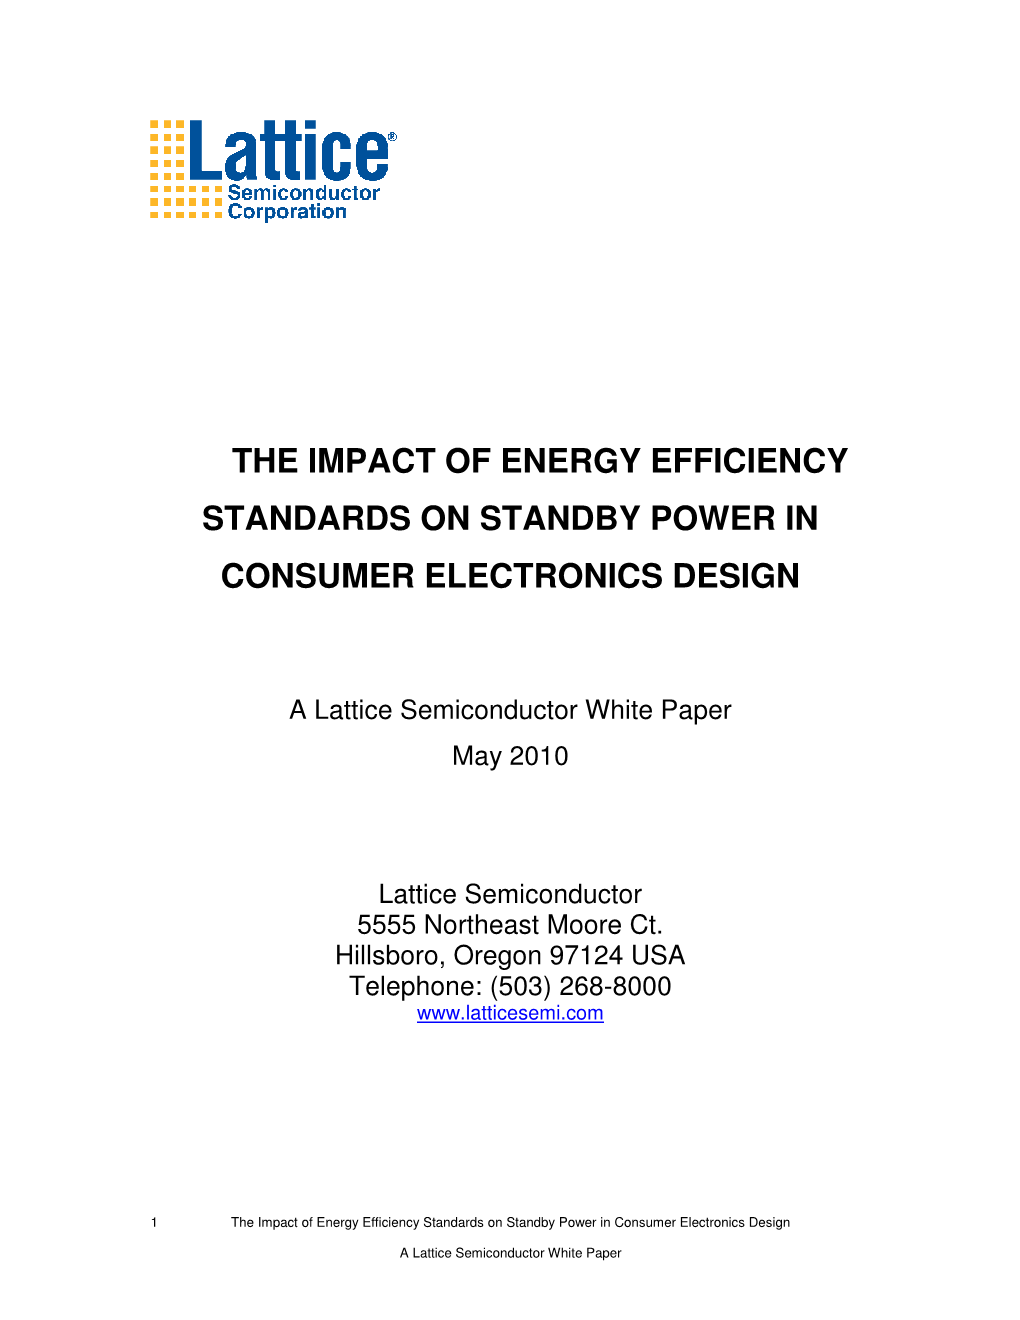 The Impact of Energy Efficiency Standards on Standby Power in Consumer Electronics Design